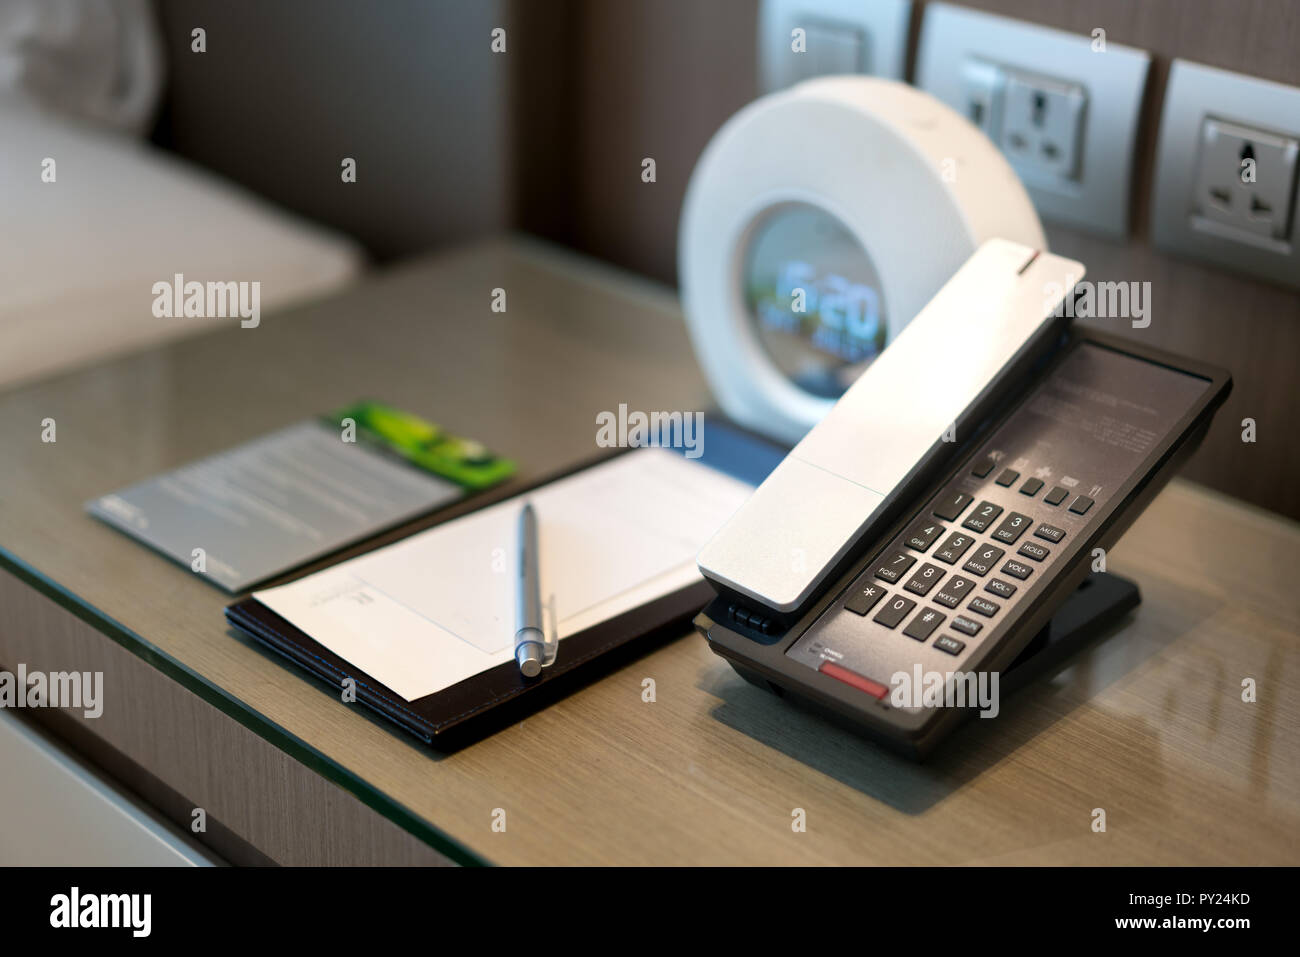 Black telephone and note in front and bed in the background, focus on the telephone,for room service,communication themes in hotel or resort. Stock Photo